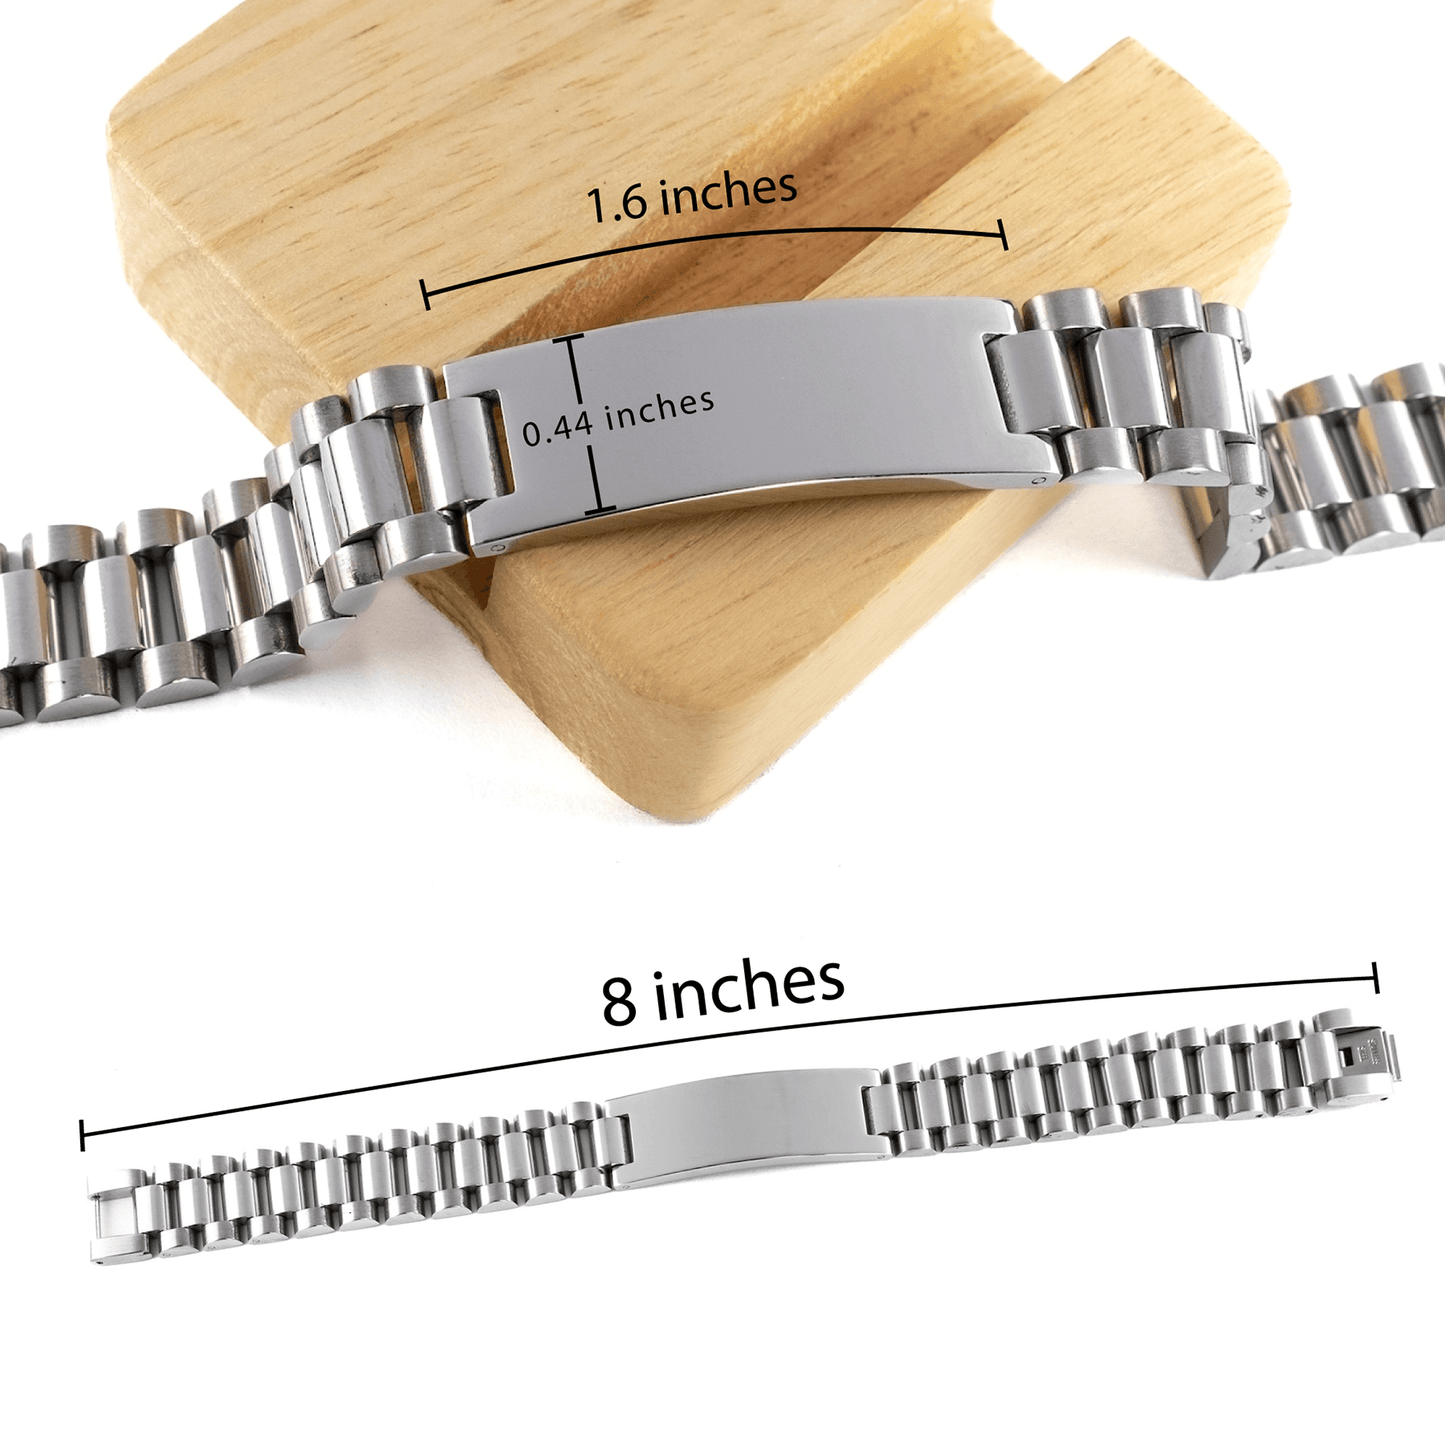 Sarcastic Nurse Practicioner Ladder Stainless Steel Bracelet Gifts, Christmas Holiday Gifts for Nurse Practicioner Birthday, Nurse Practicioner: Because greatness is woven into the fabric of every day, Coworkers, Friends - Mallard Moon Gift Shop